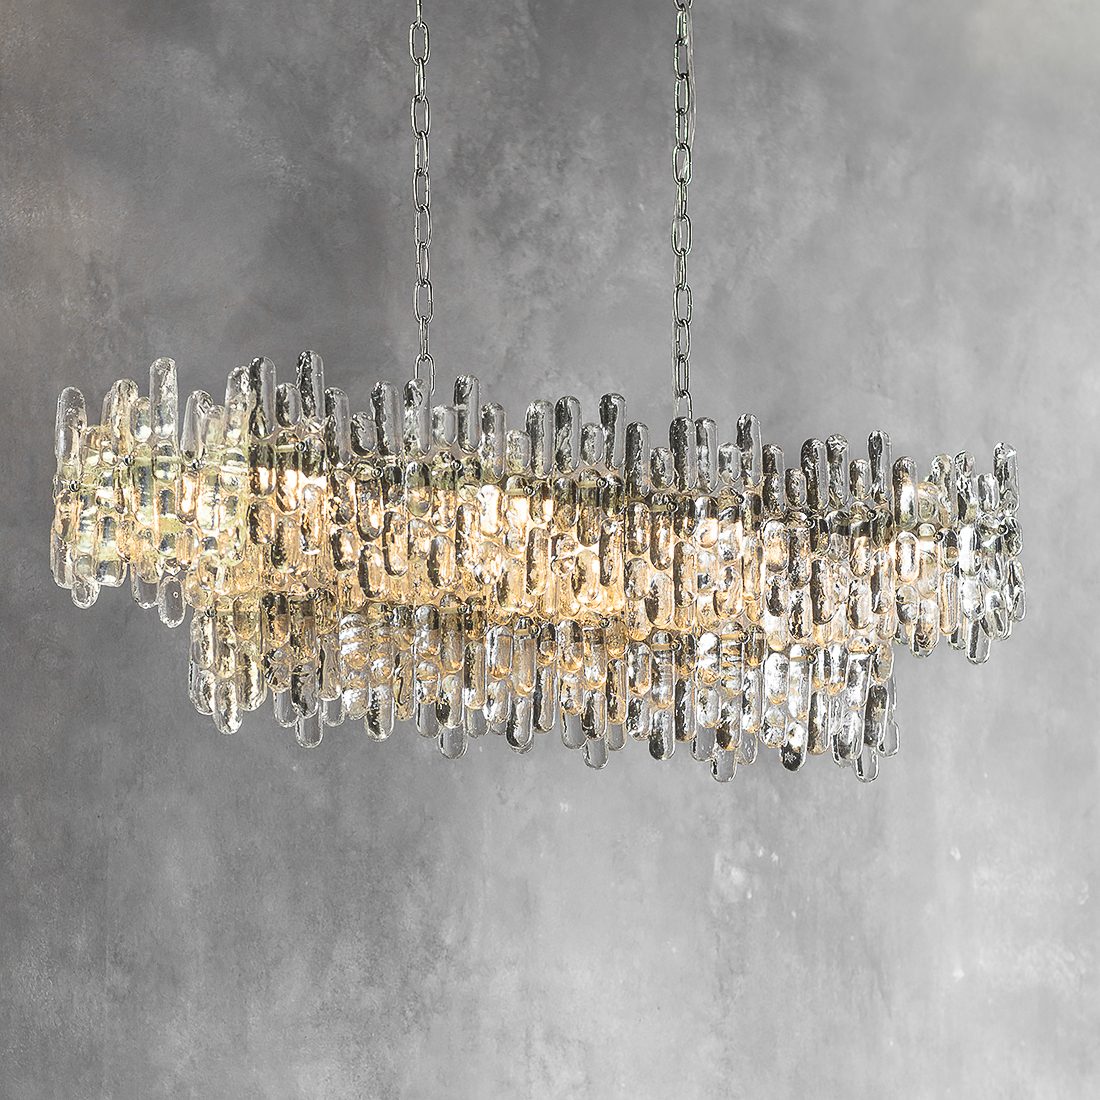 Chandeliers | Add in the Extra Style and Grace to Your Home!